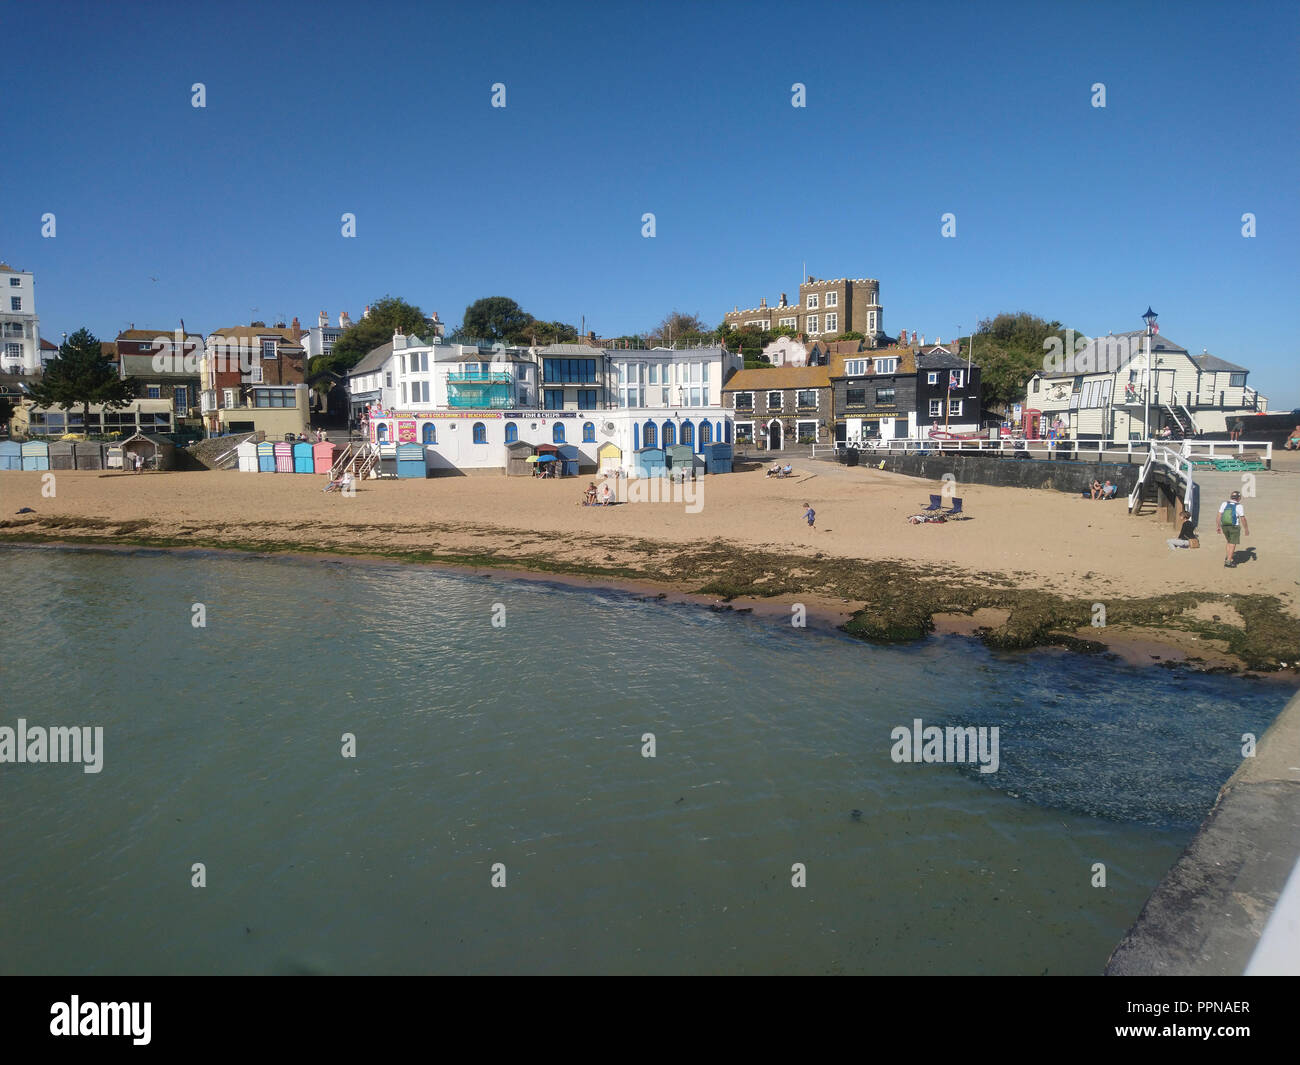 Broadstairs, Kent. 27th Sept 2018. UK Weather: Some people enjoying a sunny and warm day in late Autumn at Viking Bay in Broadstairs on the North Kent coast in England Great Britain UK Credit: Shaun Higson - Image Collection/Alamy Live News Stock Photo